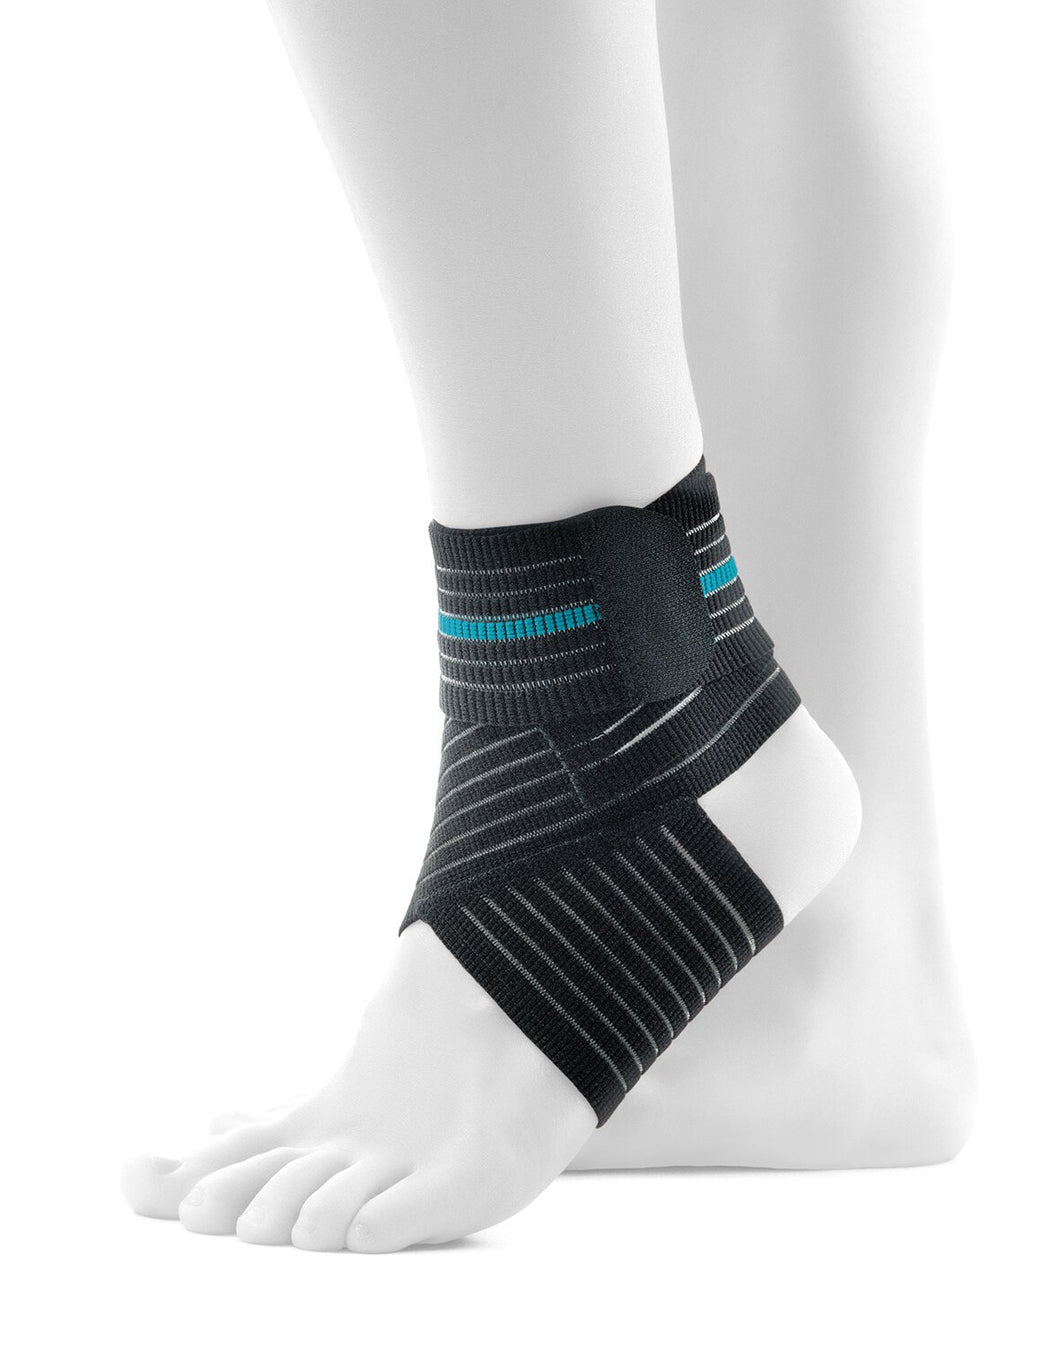 Elastic Ankle Support